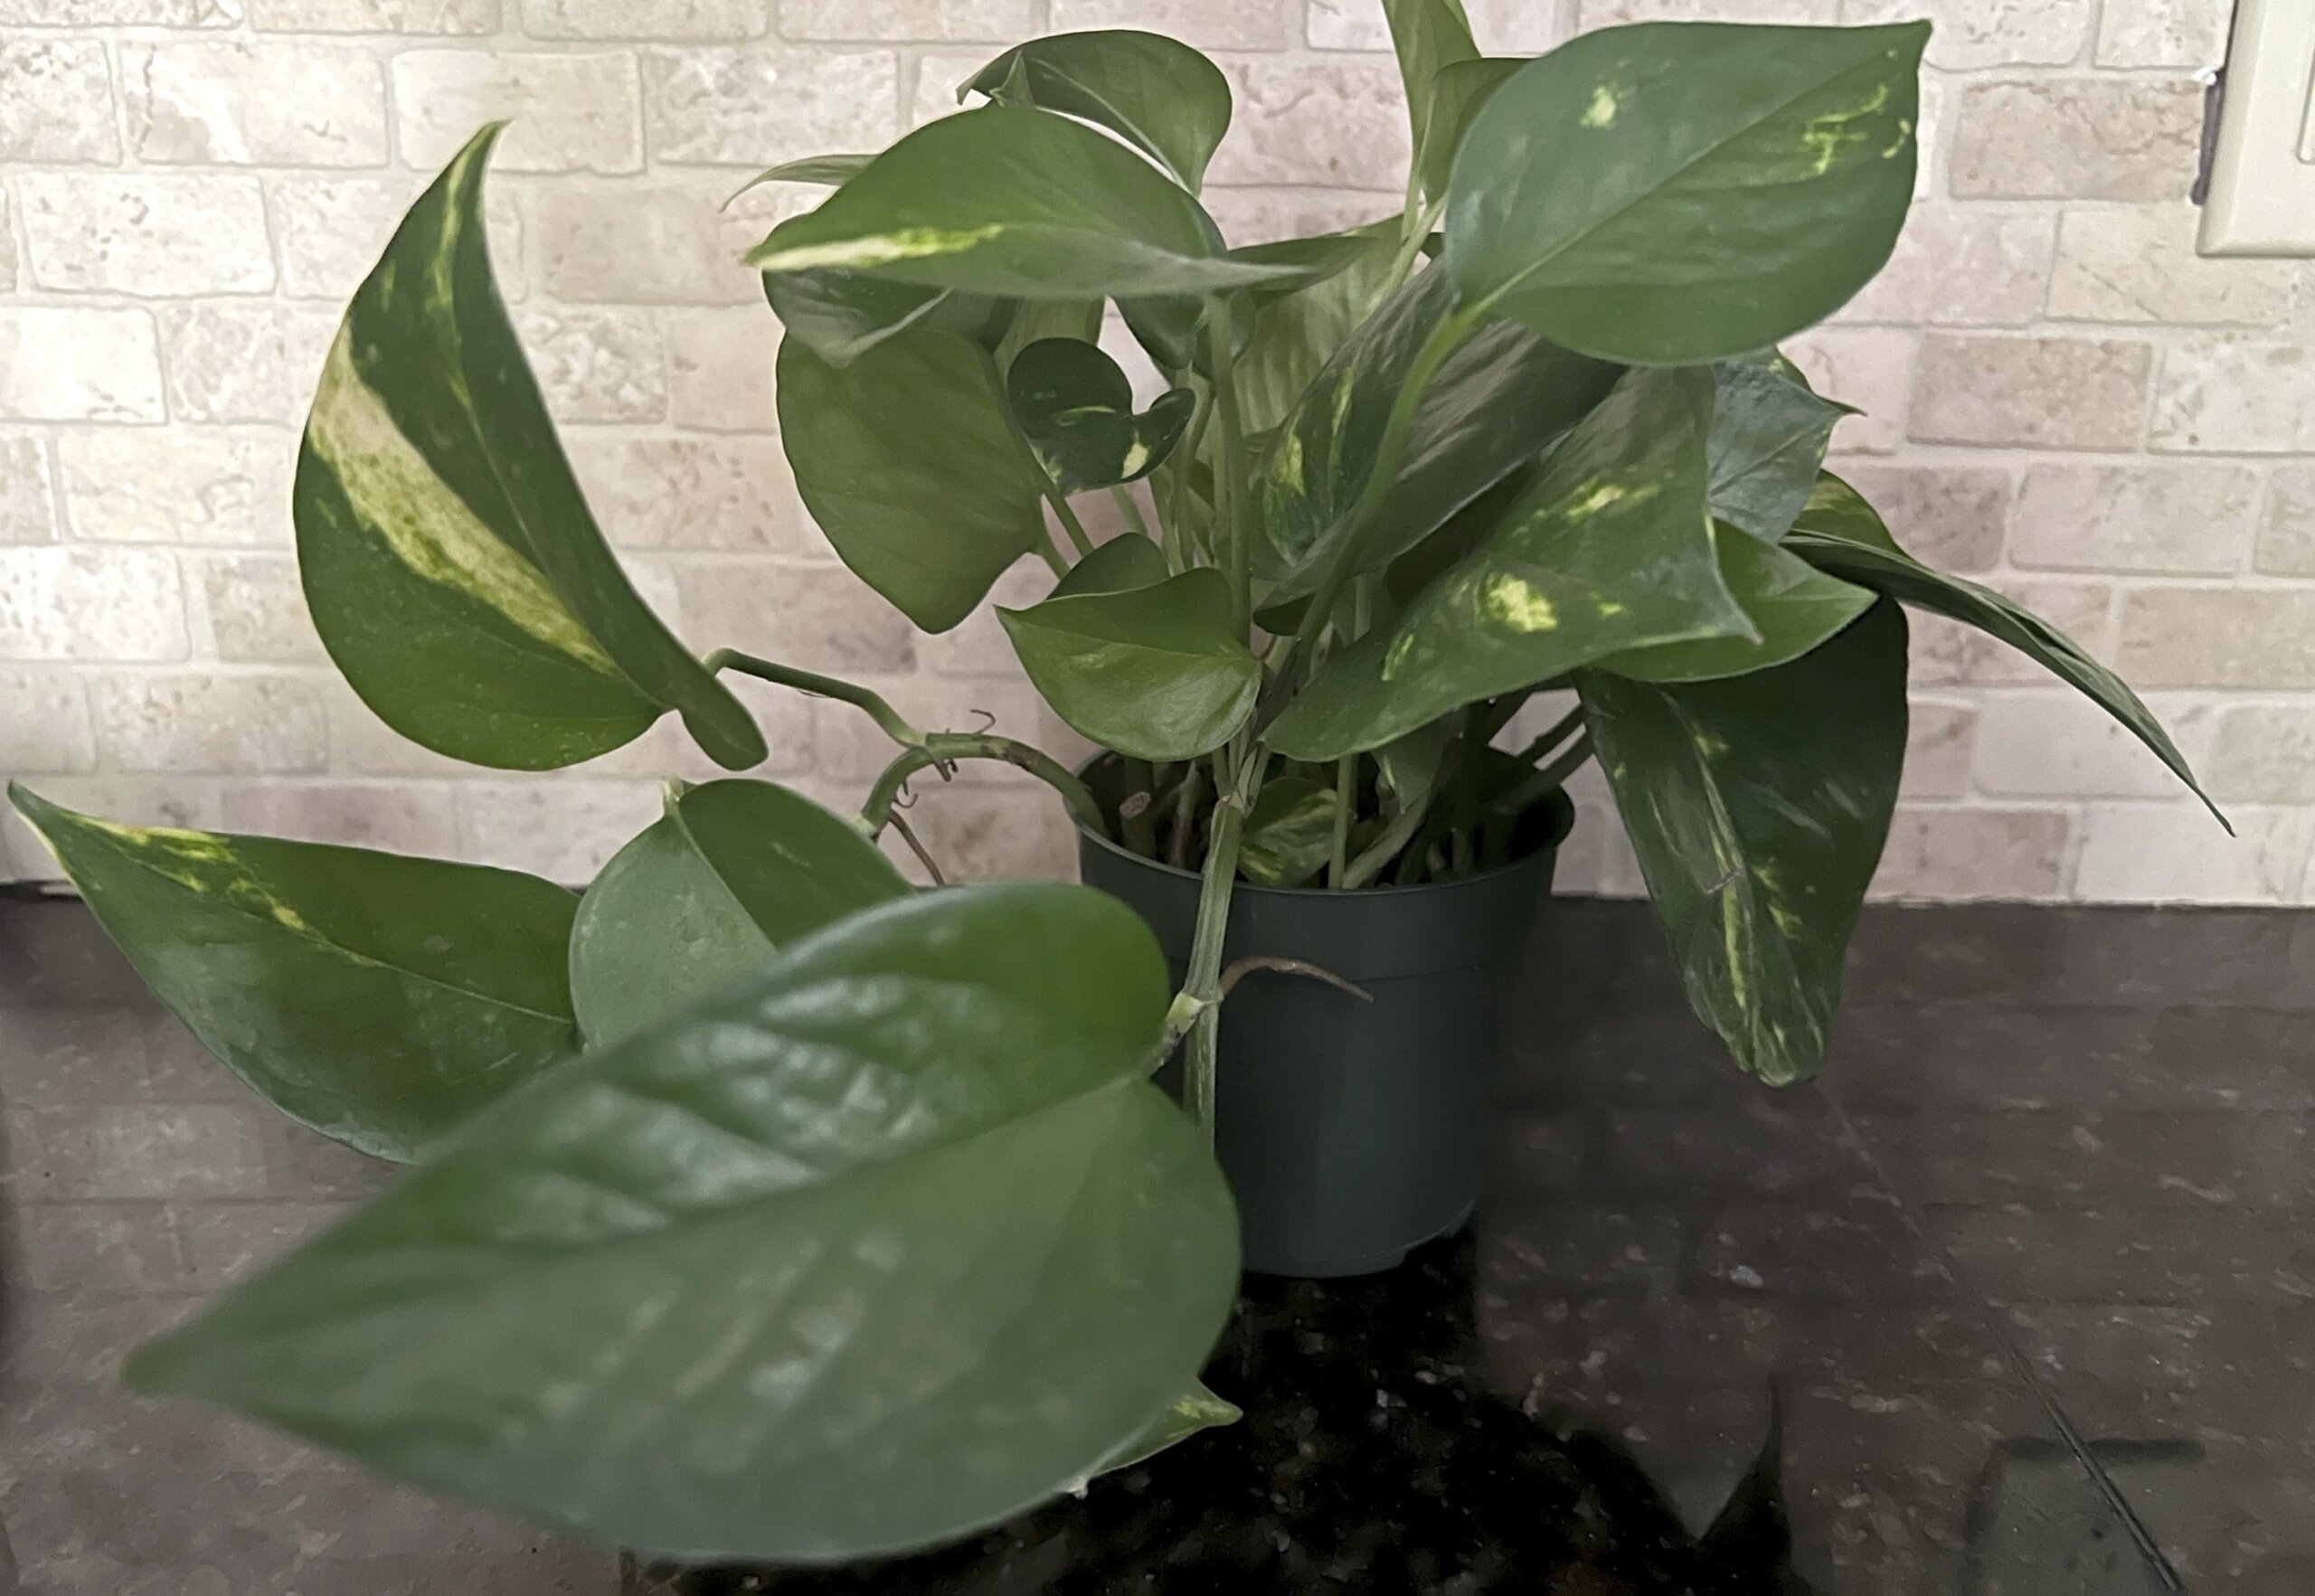 Pretty but toxic: Watch toddlers around these houseplants